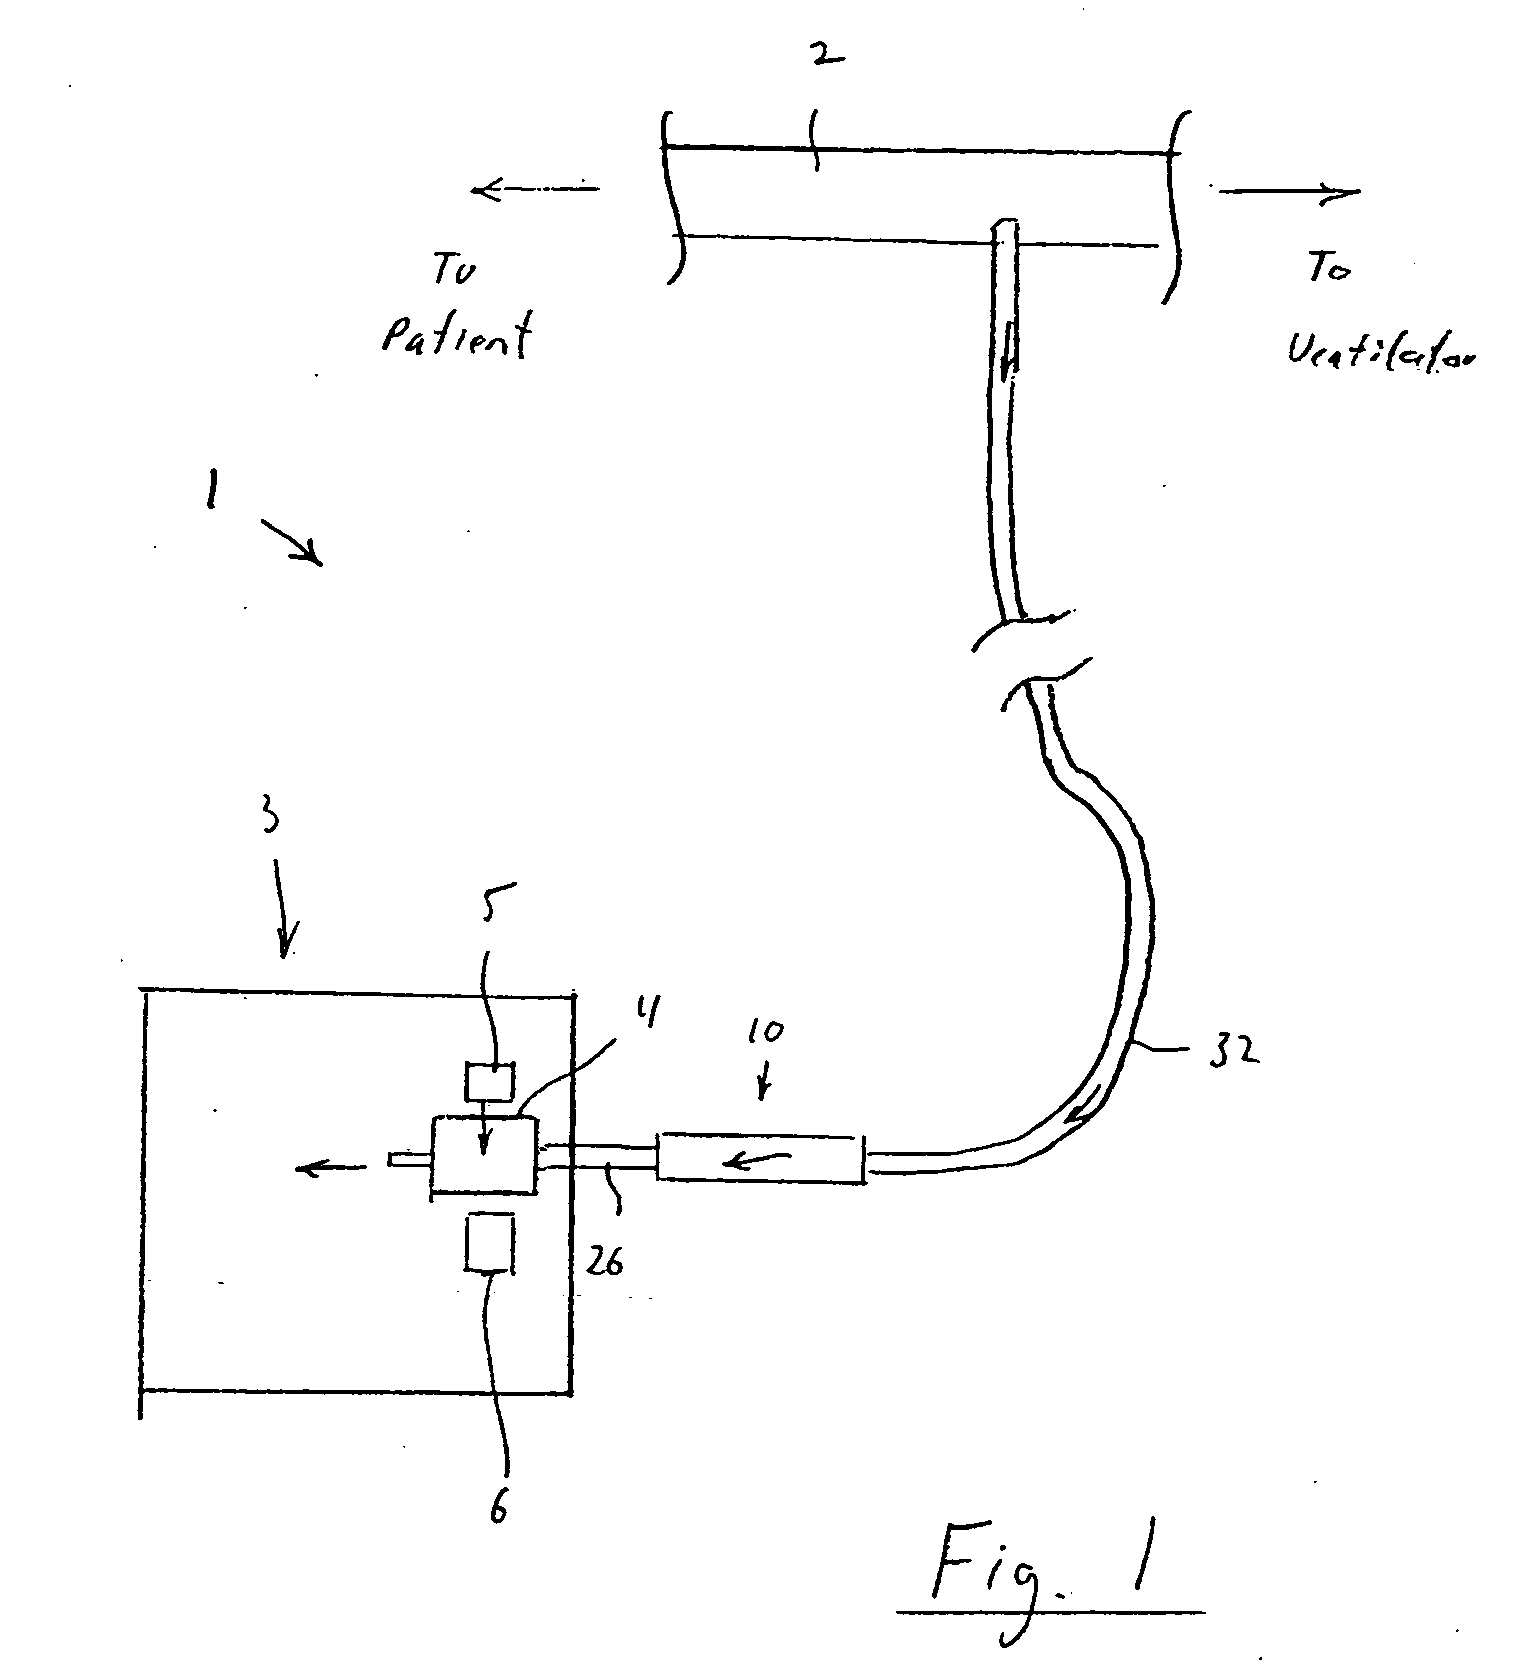 Liquid absorbing filter assembly and system